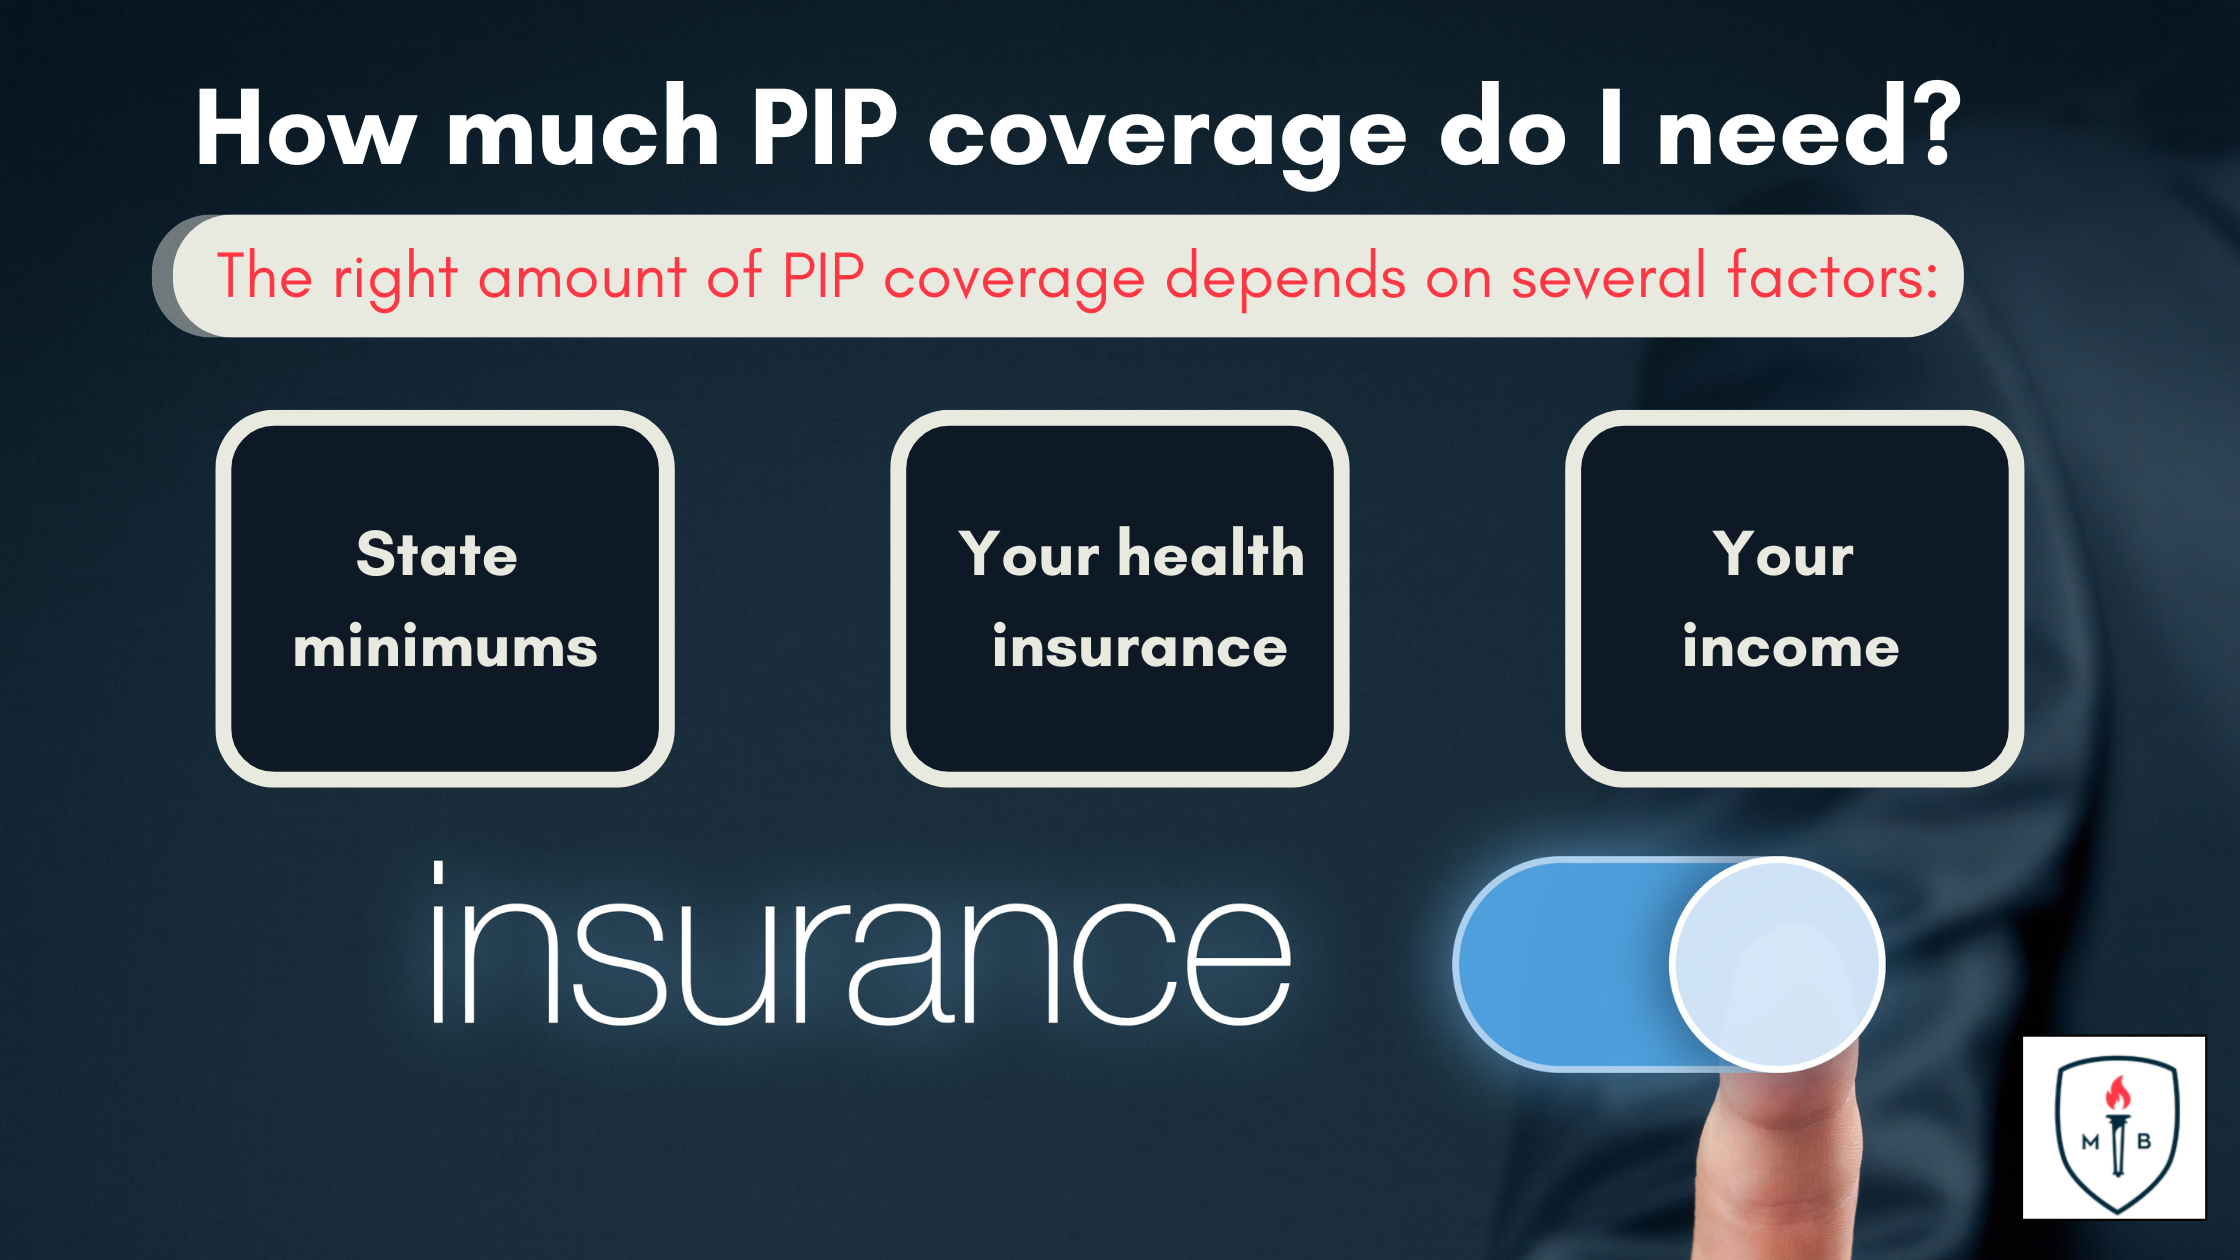 How much PIP coverage do I need